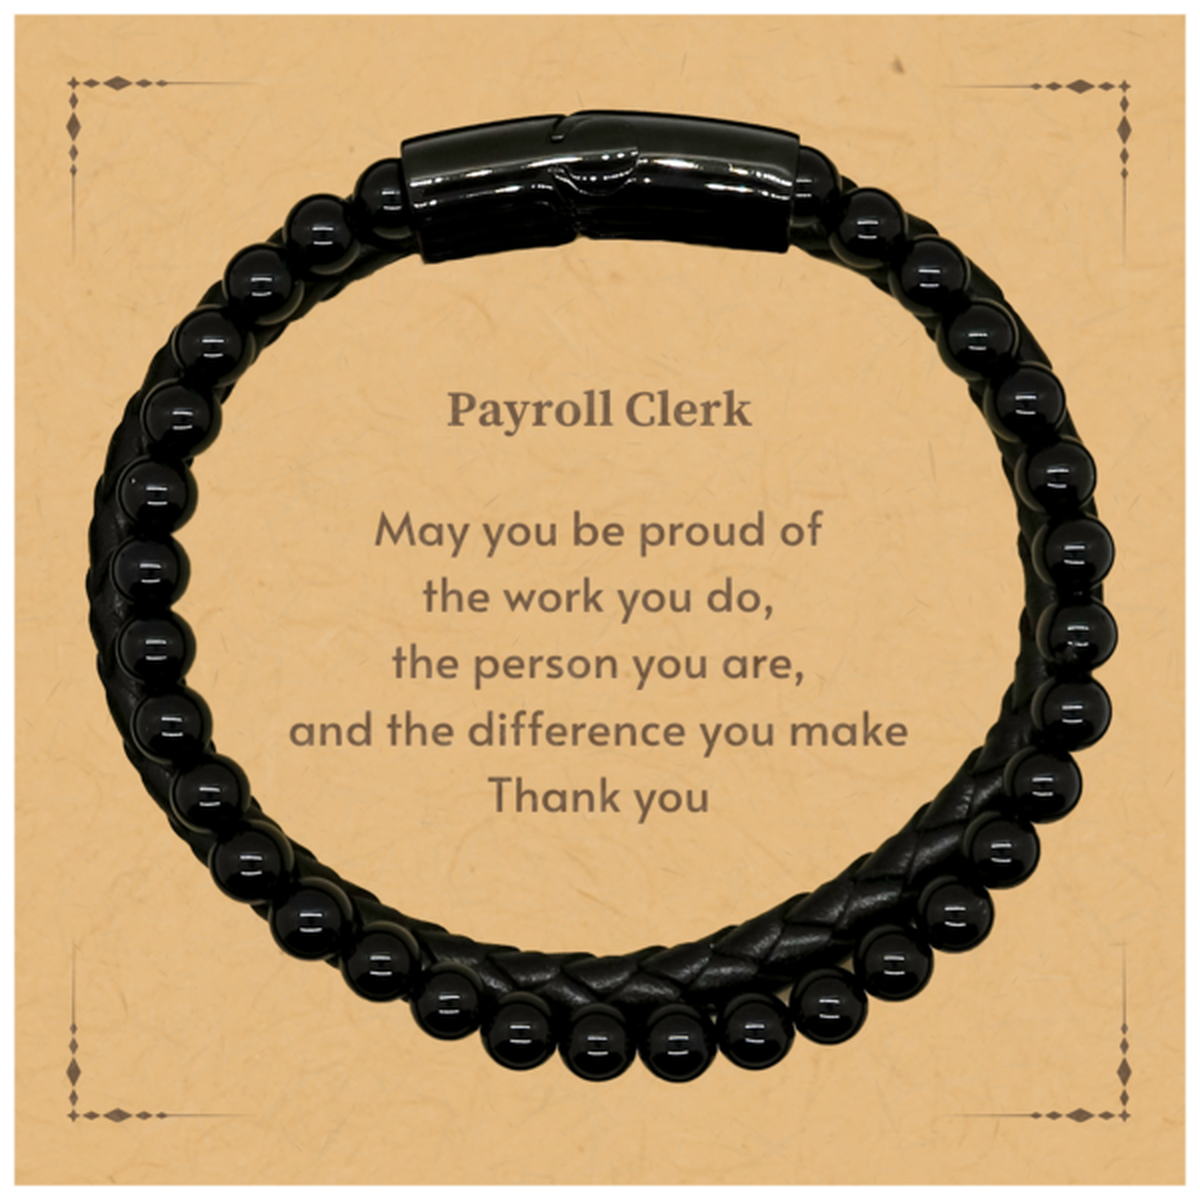 Heartwarming Stone Leather Bracelets Retirement Coworkers Gifts for Payroll Clerk, Payroll Clerk May You be proud of the work you do, the person you are Gifts for Boss Men Women Friends